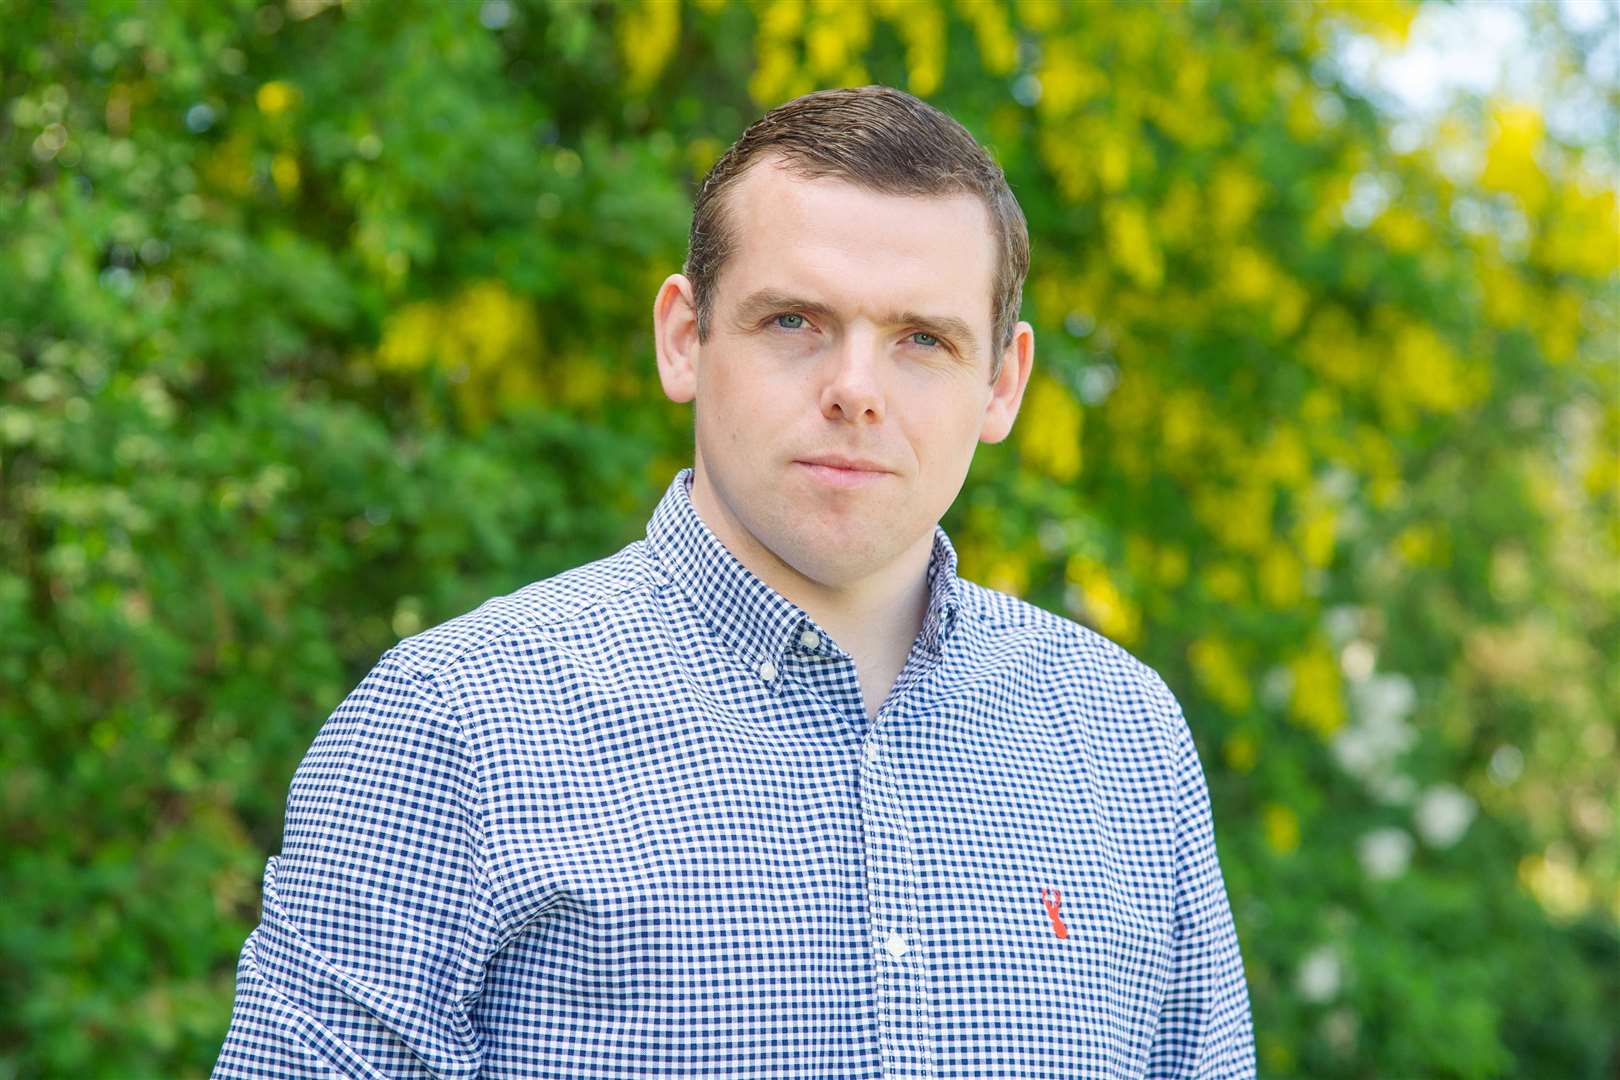 Moray MP and Highlands and Islands MSP Douglas Ross. Picture: Daniel Forsyth